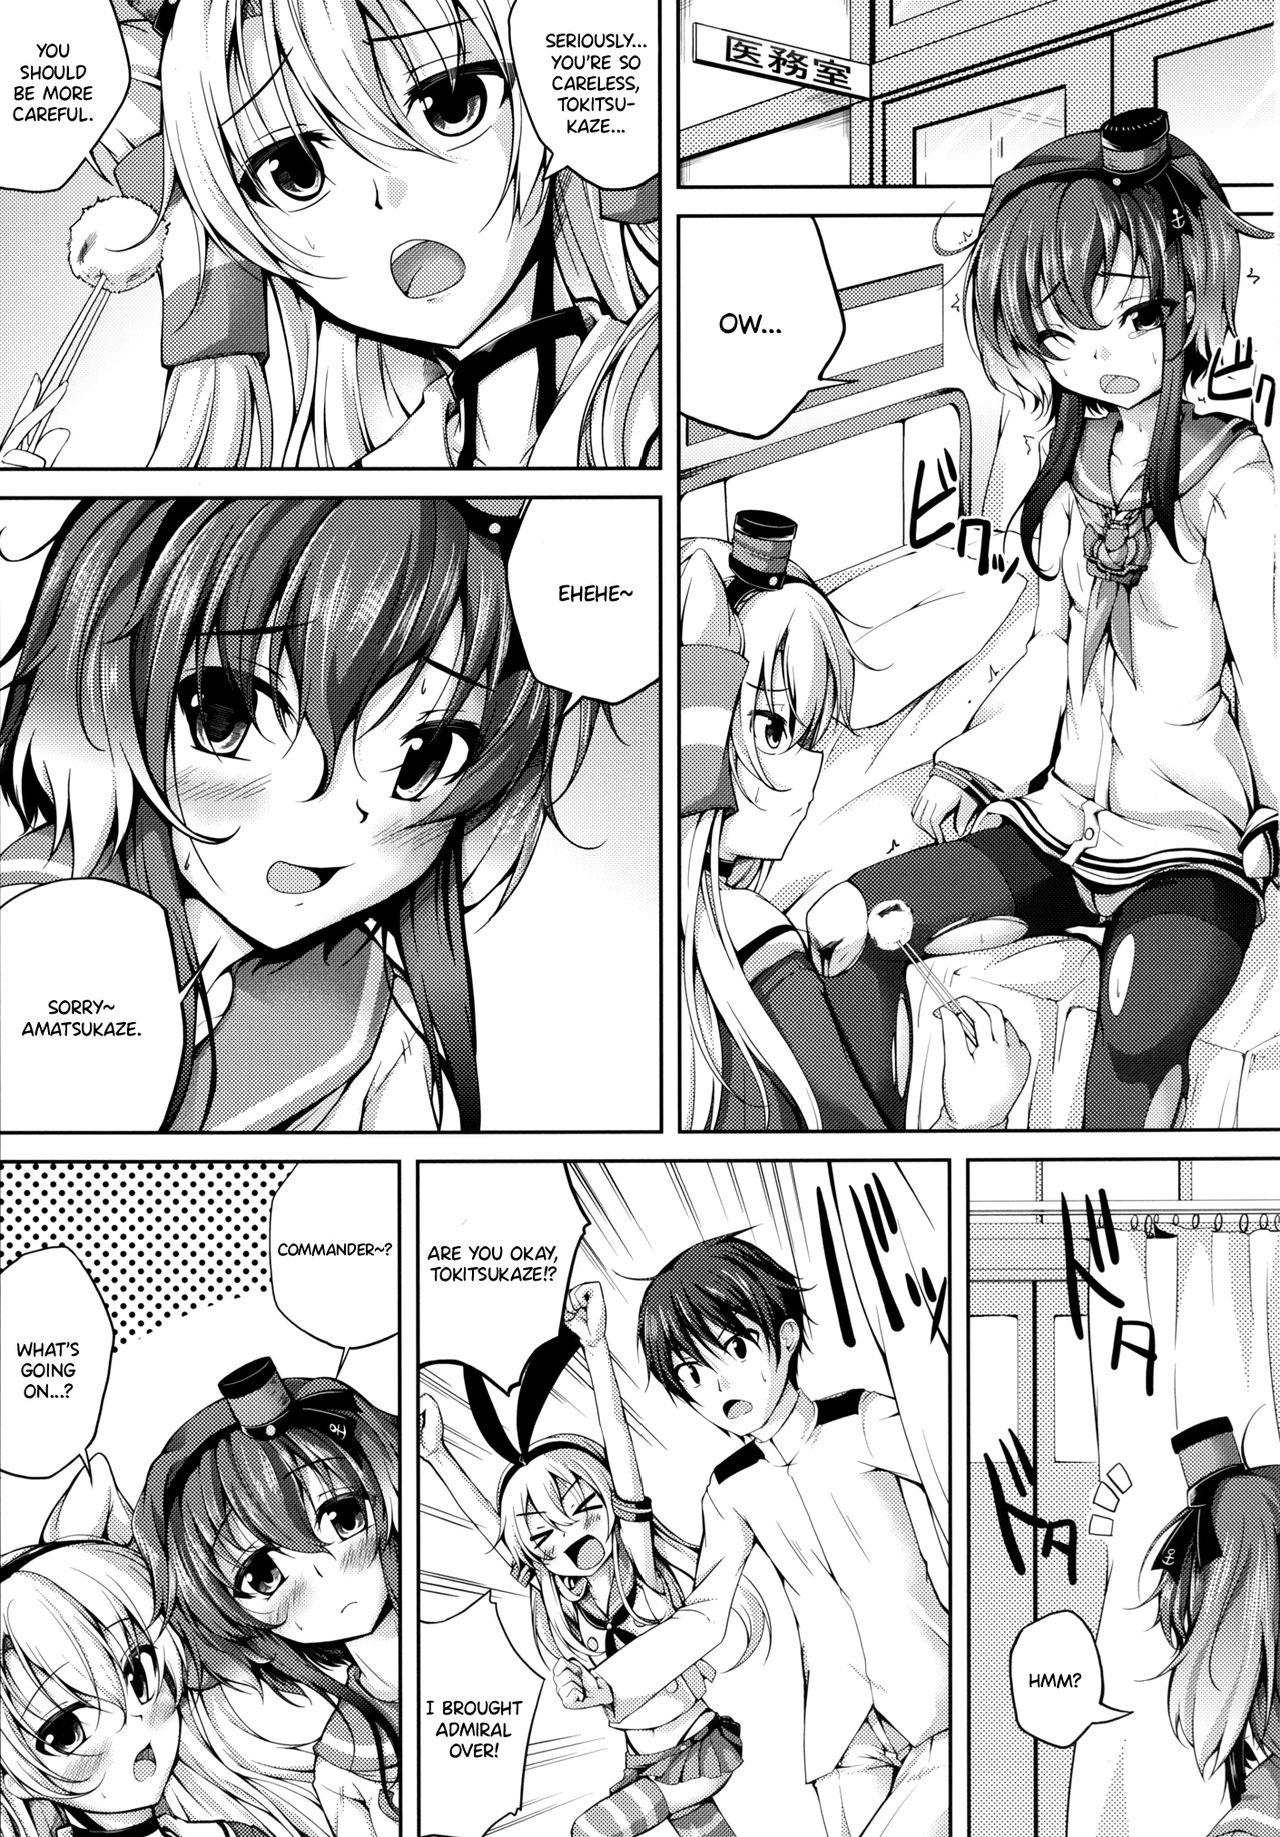 Orgasm Koiiro Moyou 9 - Kantai collection Colombian - Page 2